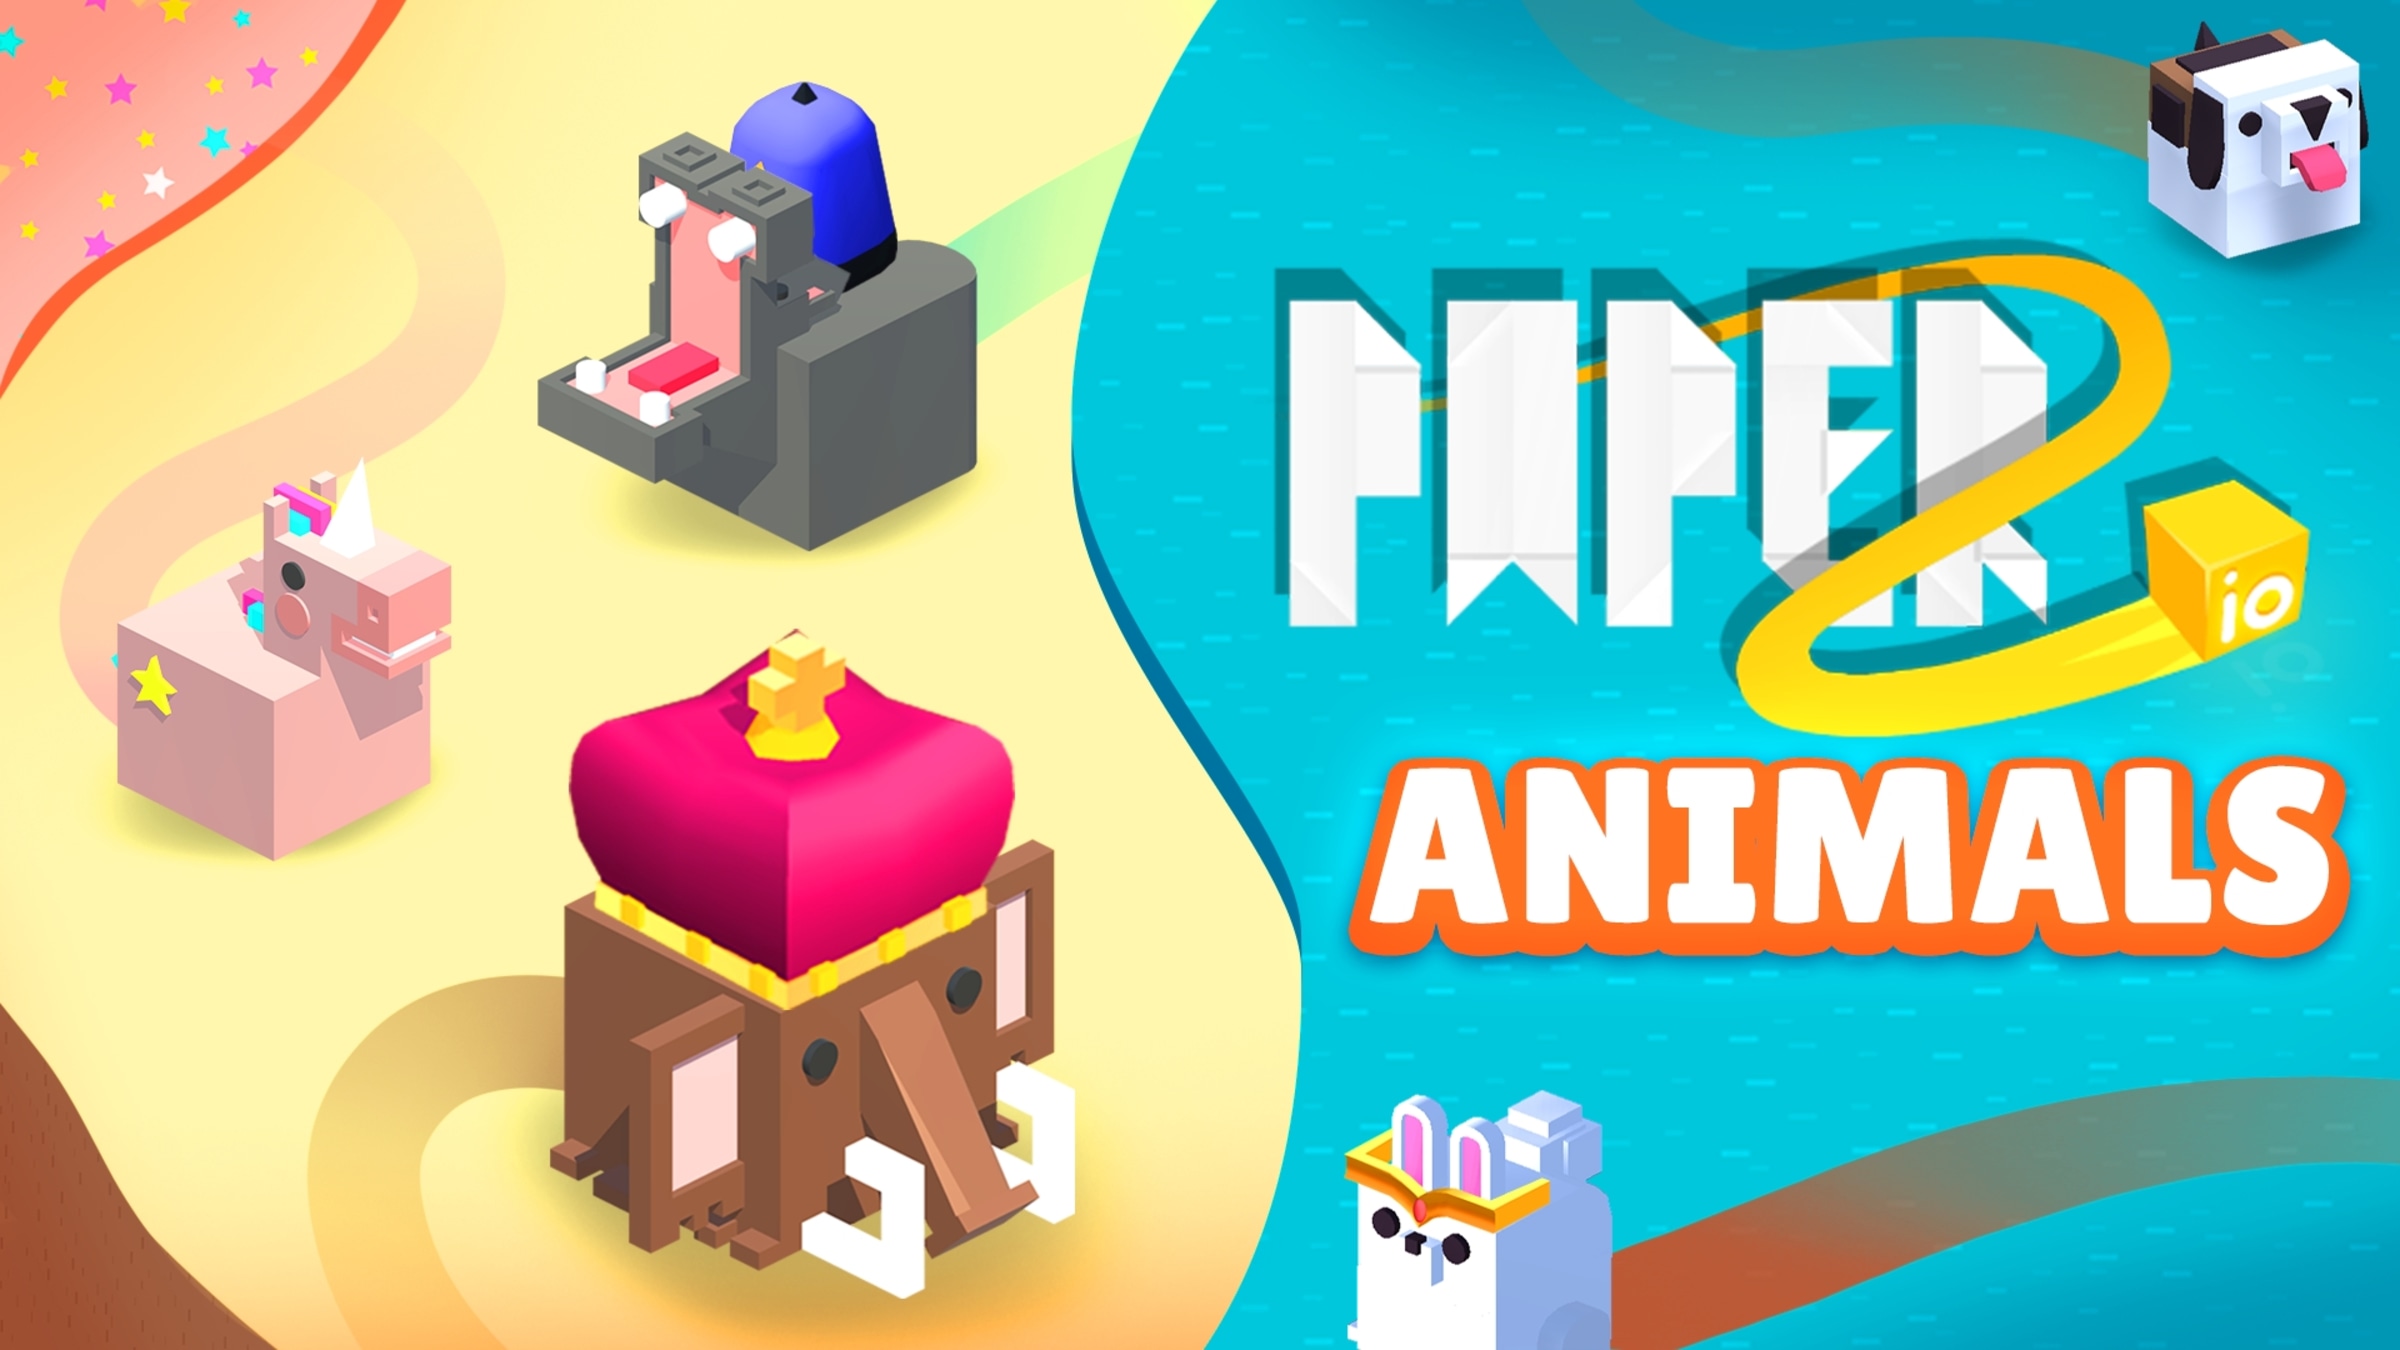 Paper io 2: Animals Edition for Nintendo Switch - Nintendo Official Site